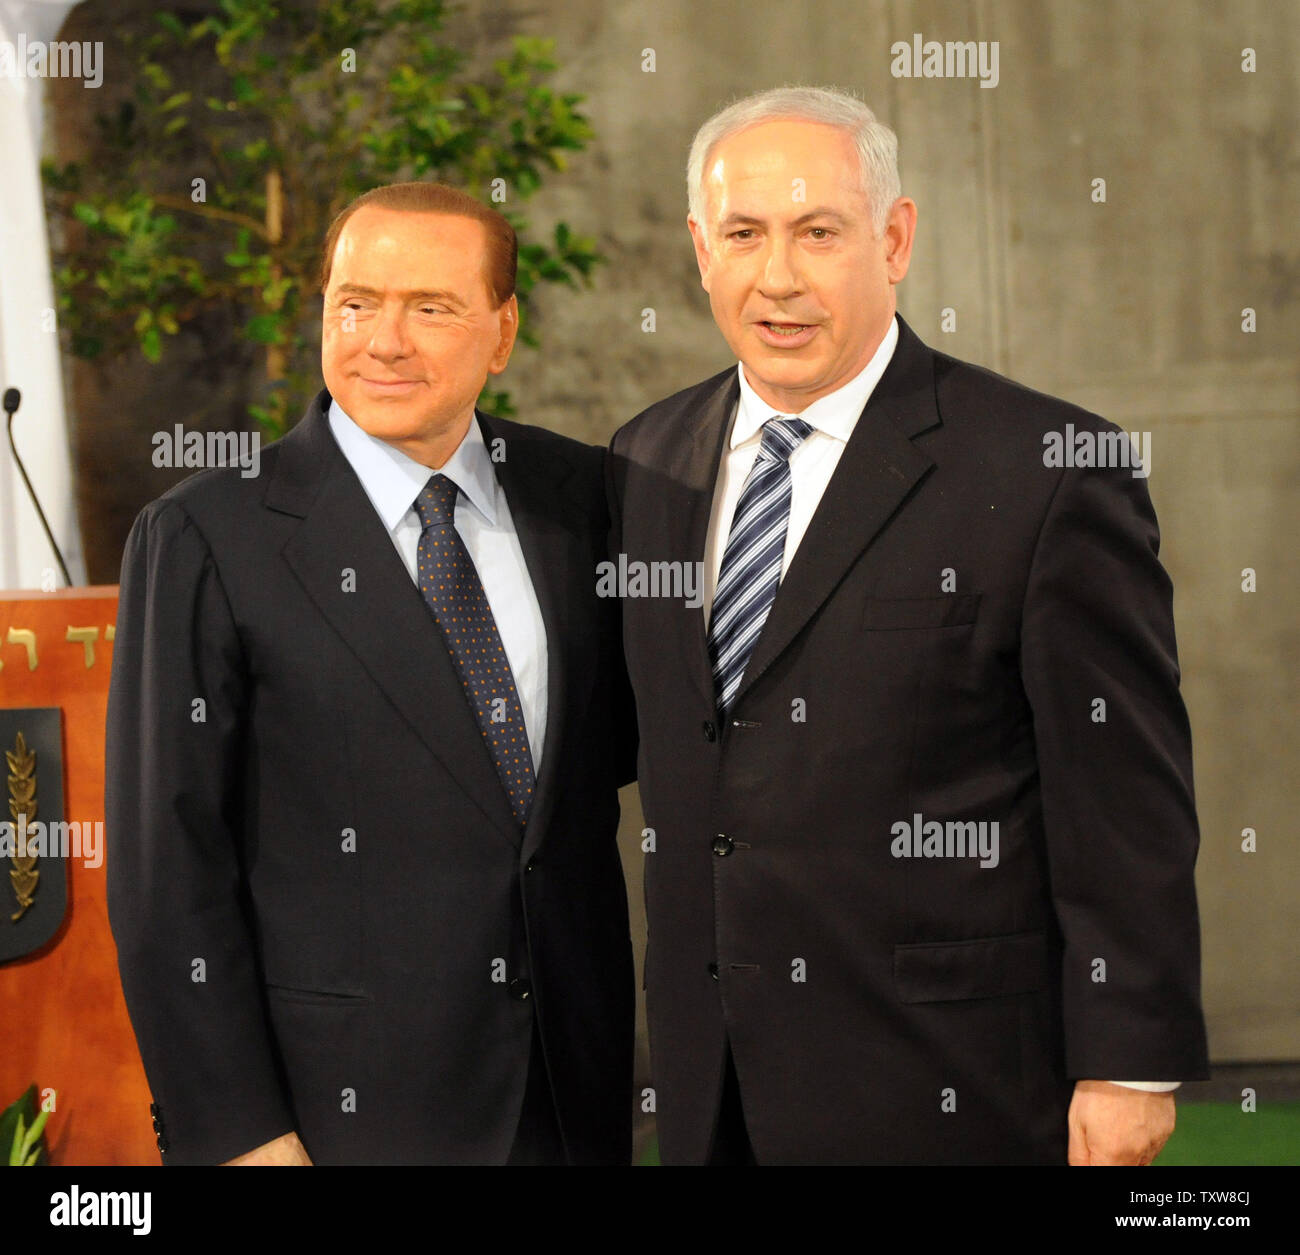 L-R:  Italian Prime Minister Silvio Berlusconi and Israeli Prime Minister Benjamin Netanyahu pose for the press during a welcoming ceremony at Netanyahu's Jerusalem office, February 1, 2010. Prime Minister Berlusconi is in Israel for a three- day visit.   UPI/Debbie Hill Stock Photo